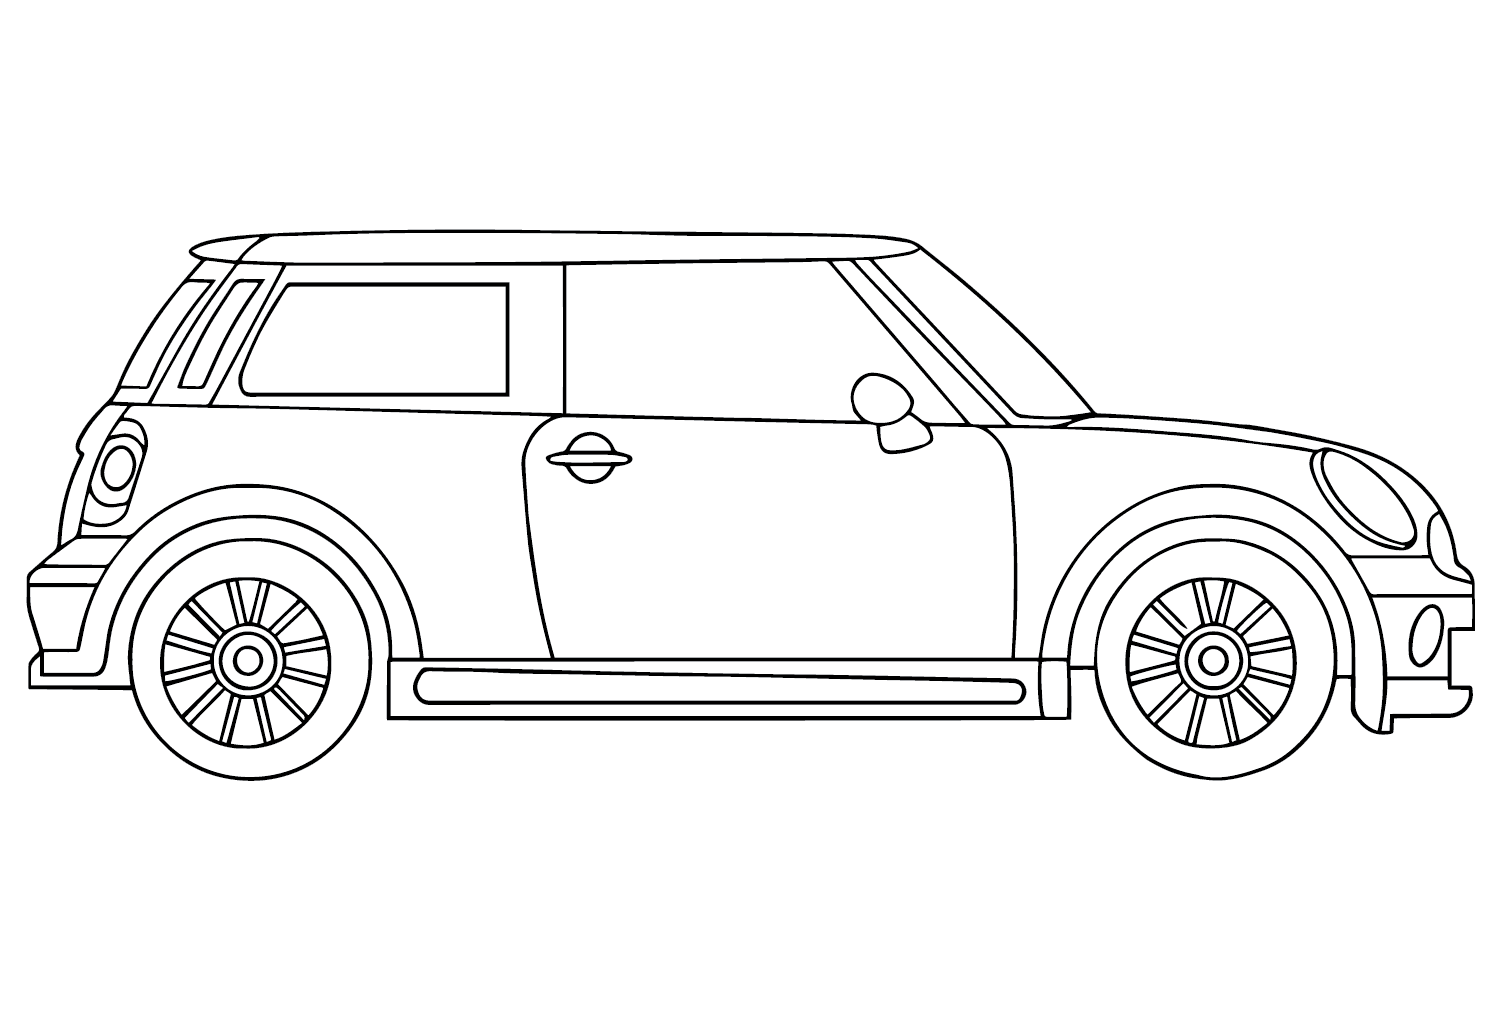 Mini Cooper Car Coloring Page - Free Printable Coloring Pages